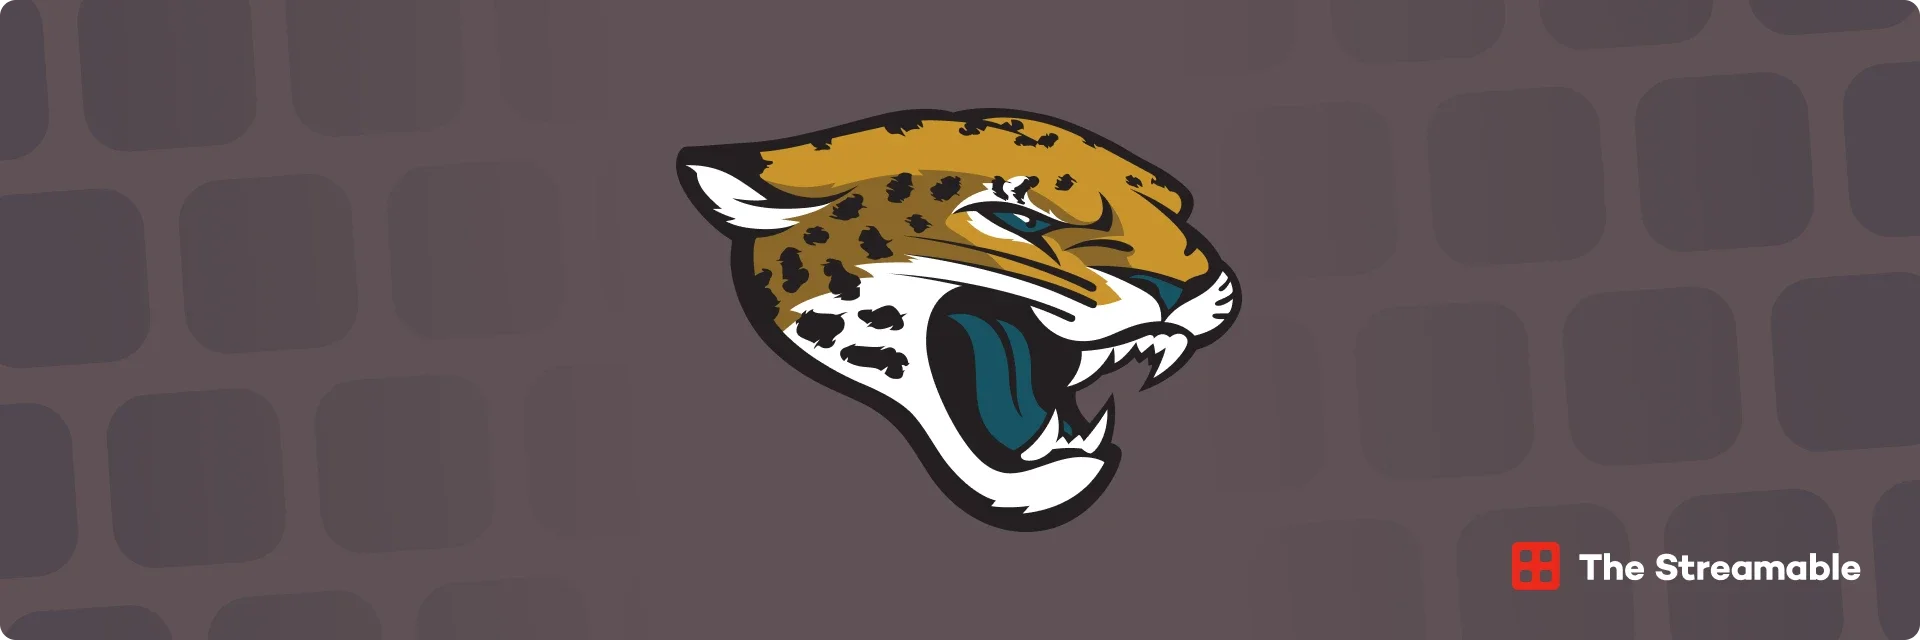 How to Watch Jacksonville Jaguars Games Online Live Without Cable